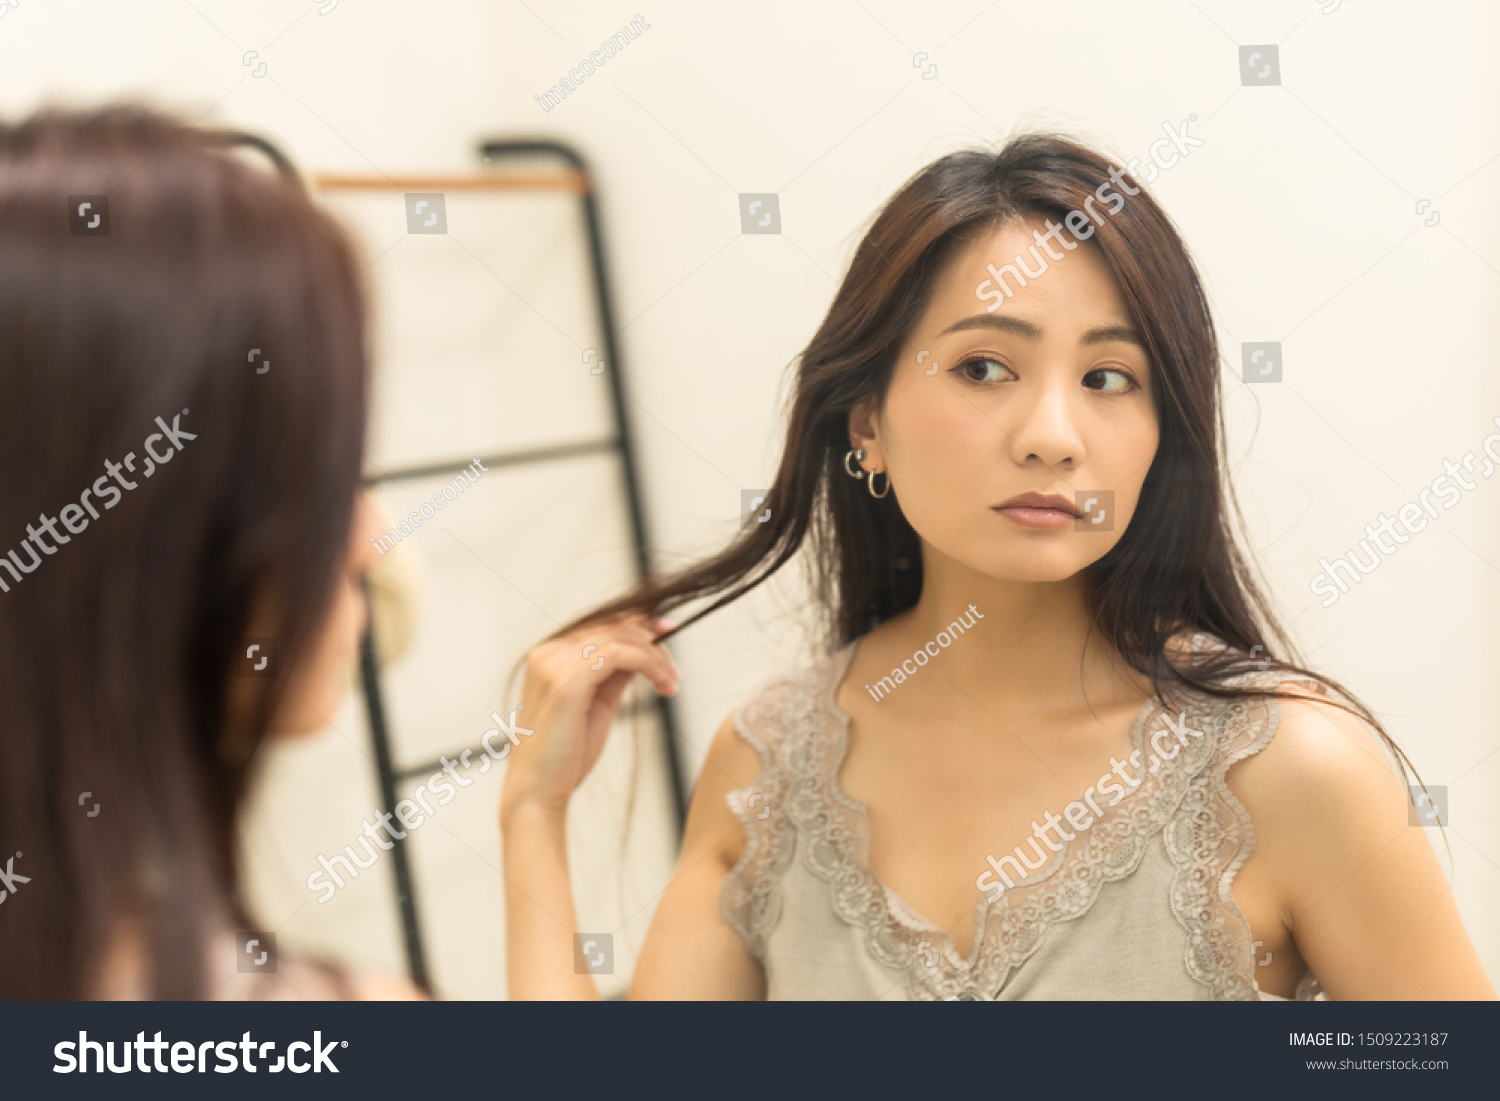 https://image.shutterstock.com/z/stock-photo-japanese-young-woman-looking-at-the-mirror-beauty-image-1509223187.jpg